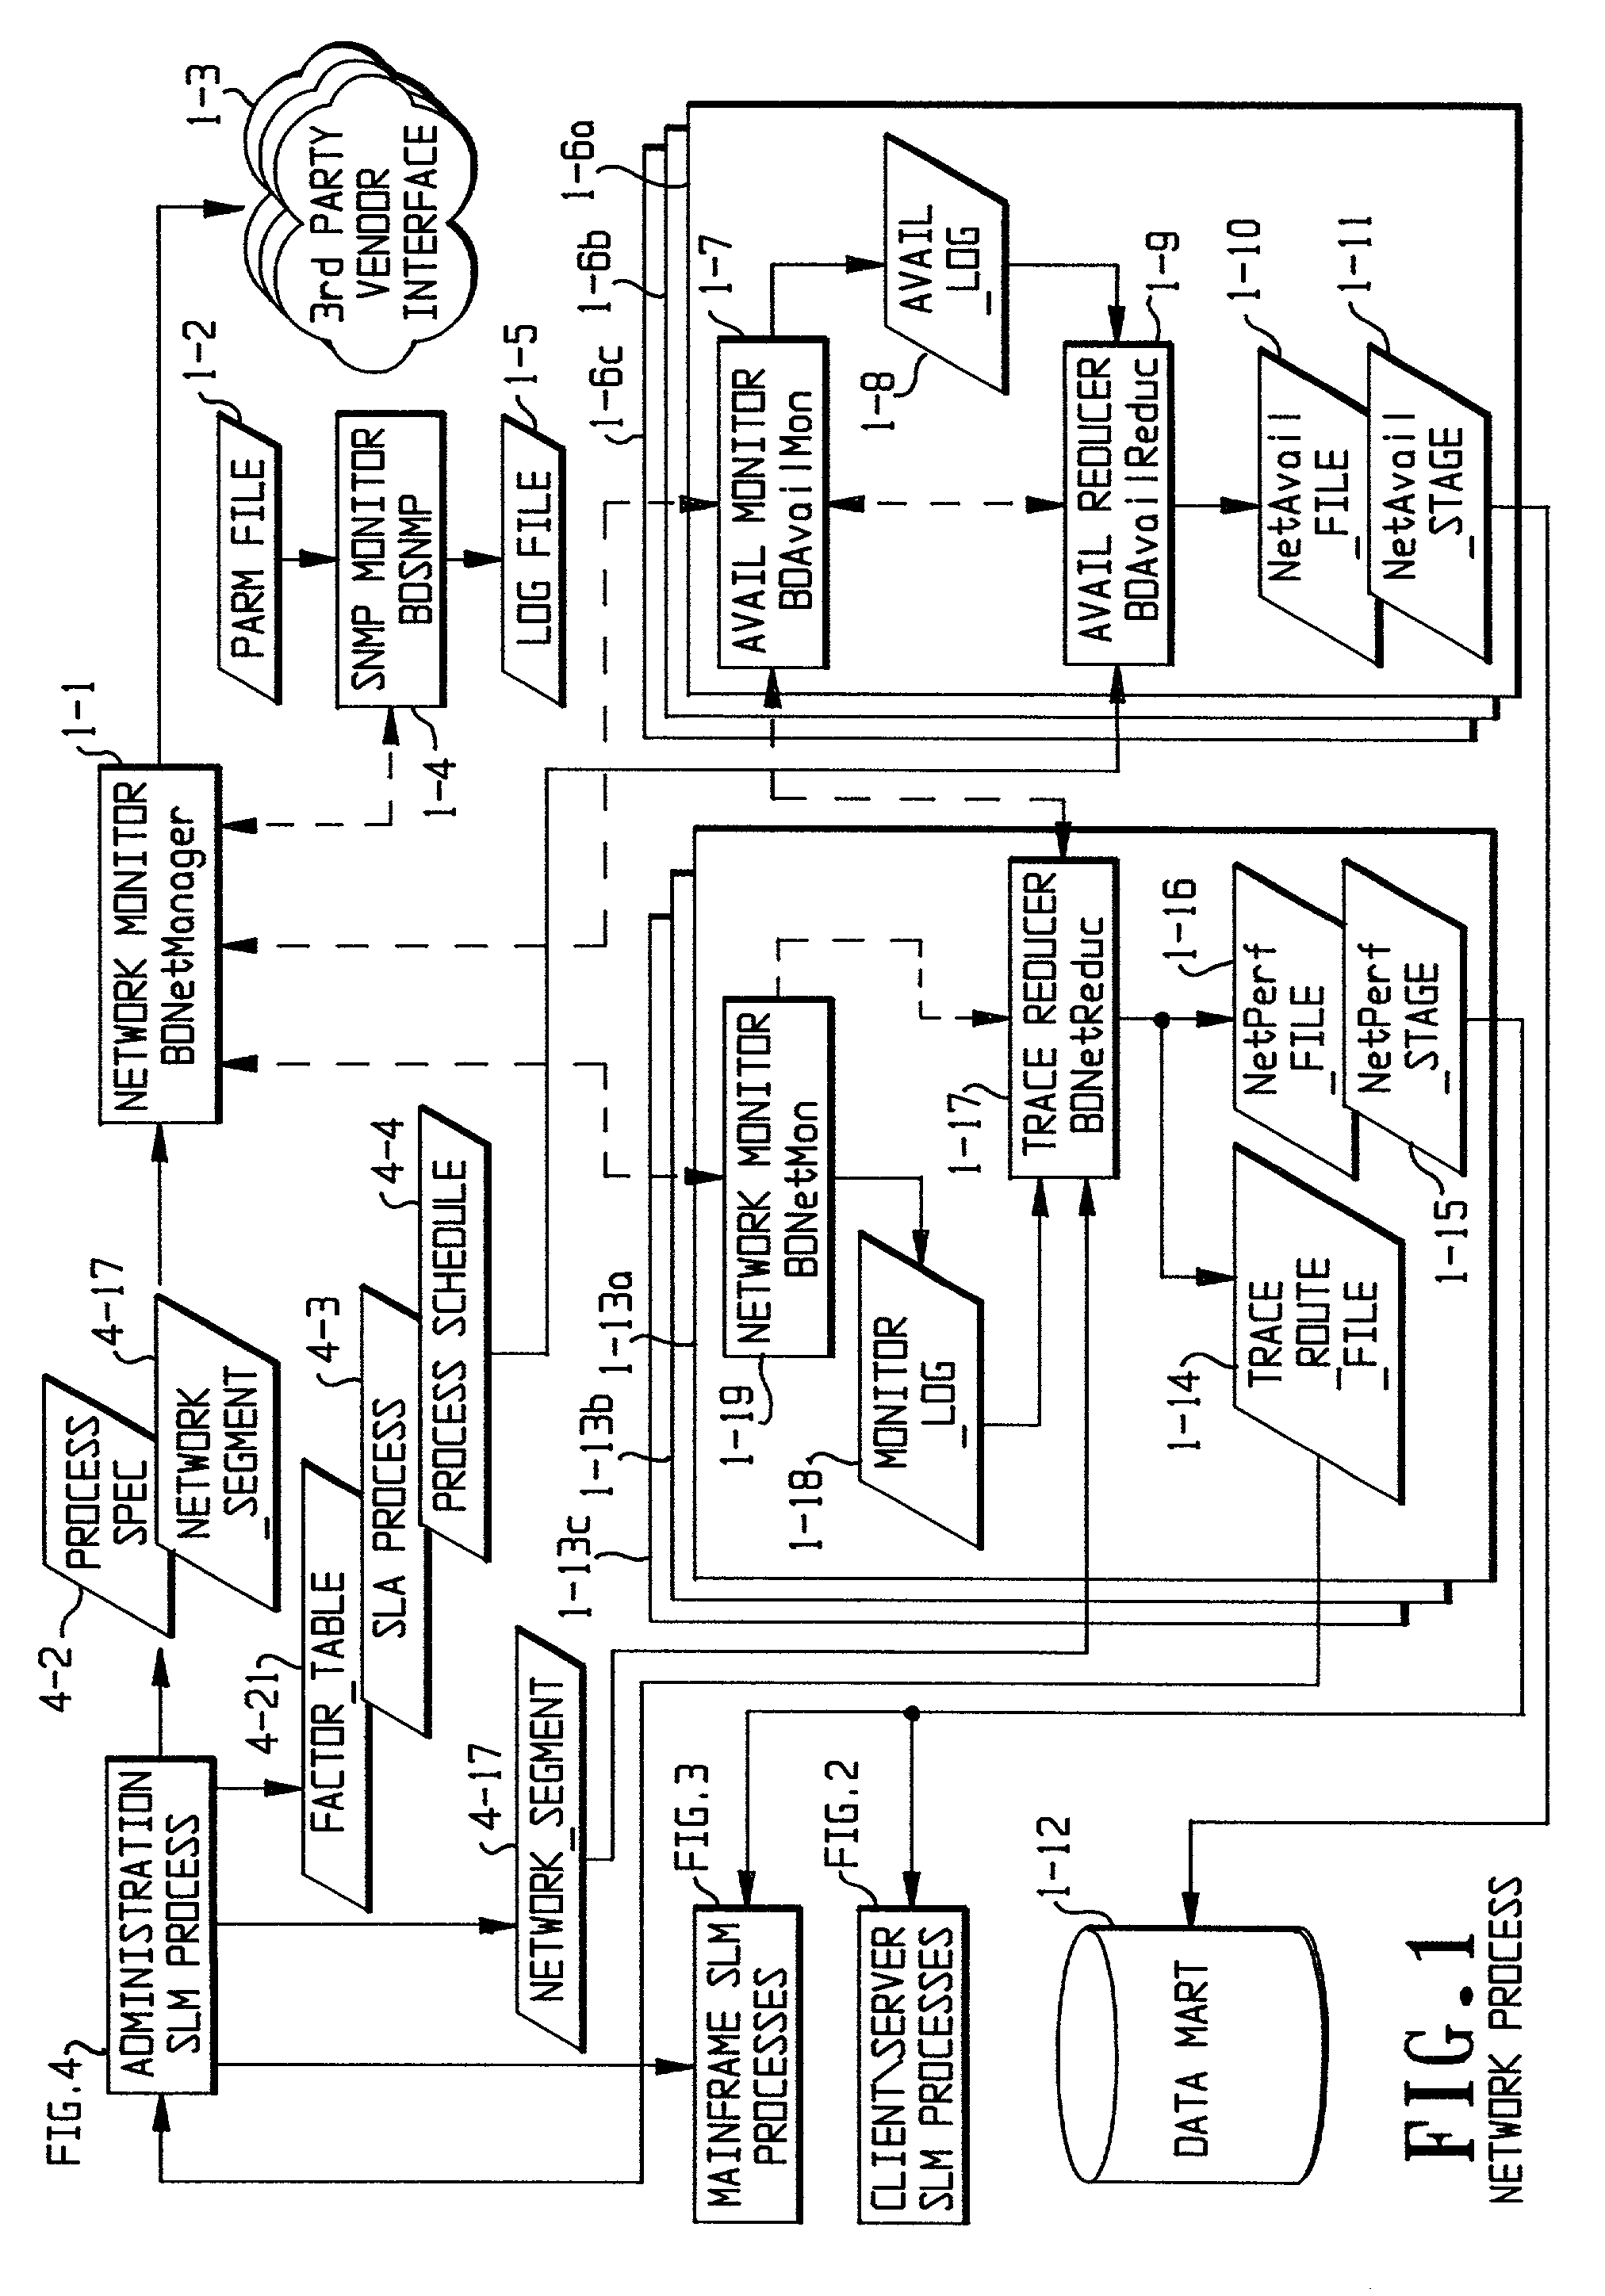 System and method for continuous monitoring and measurement of performance of computers on network